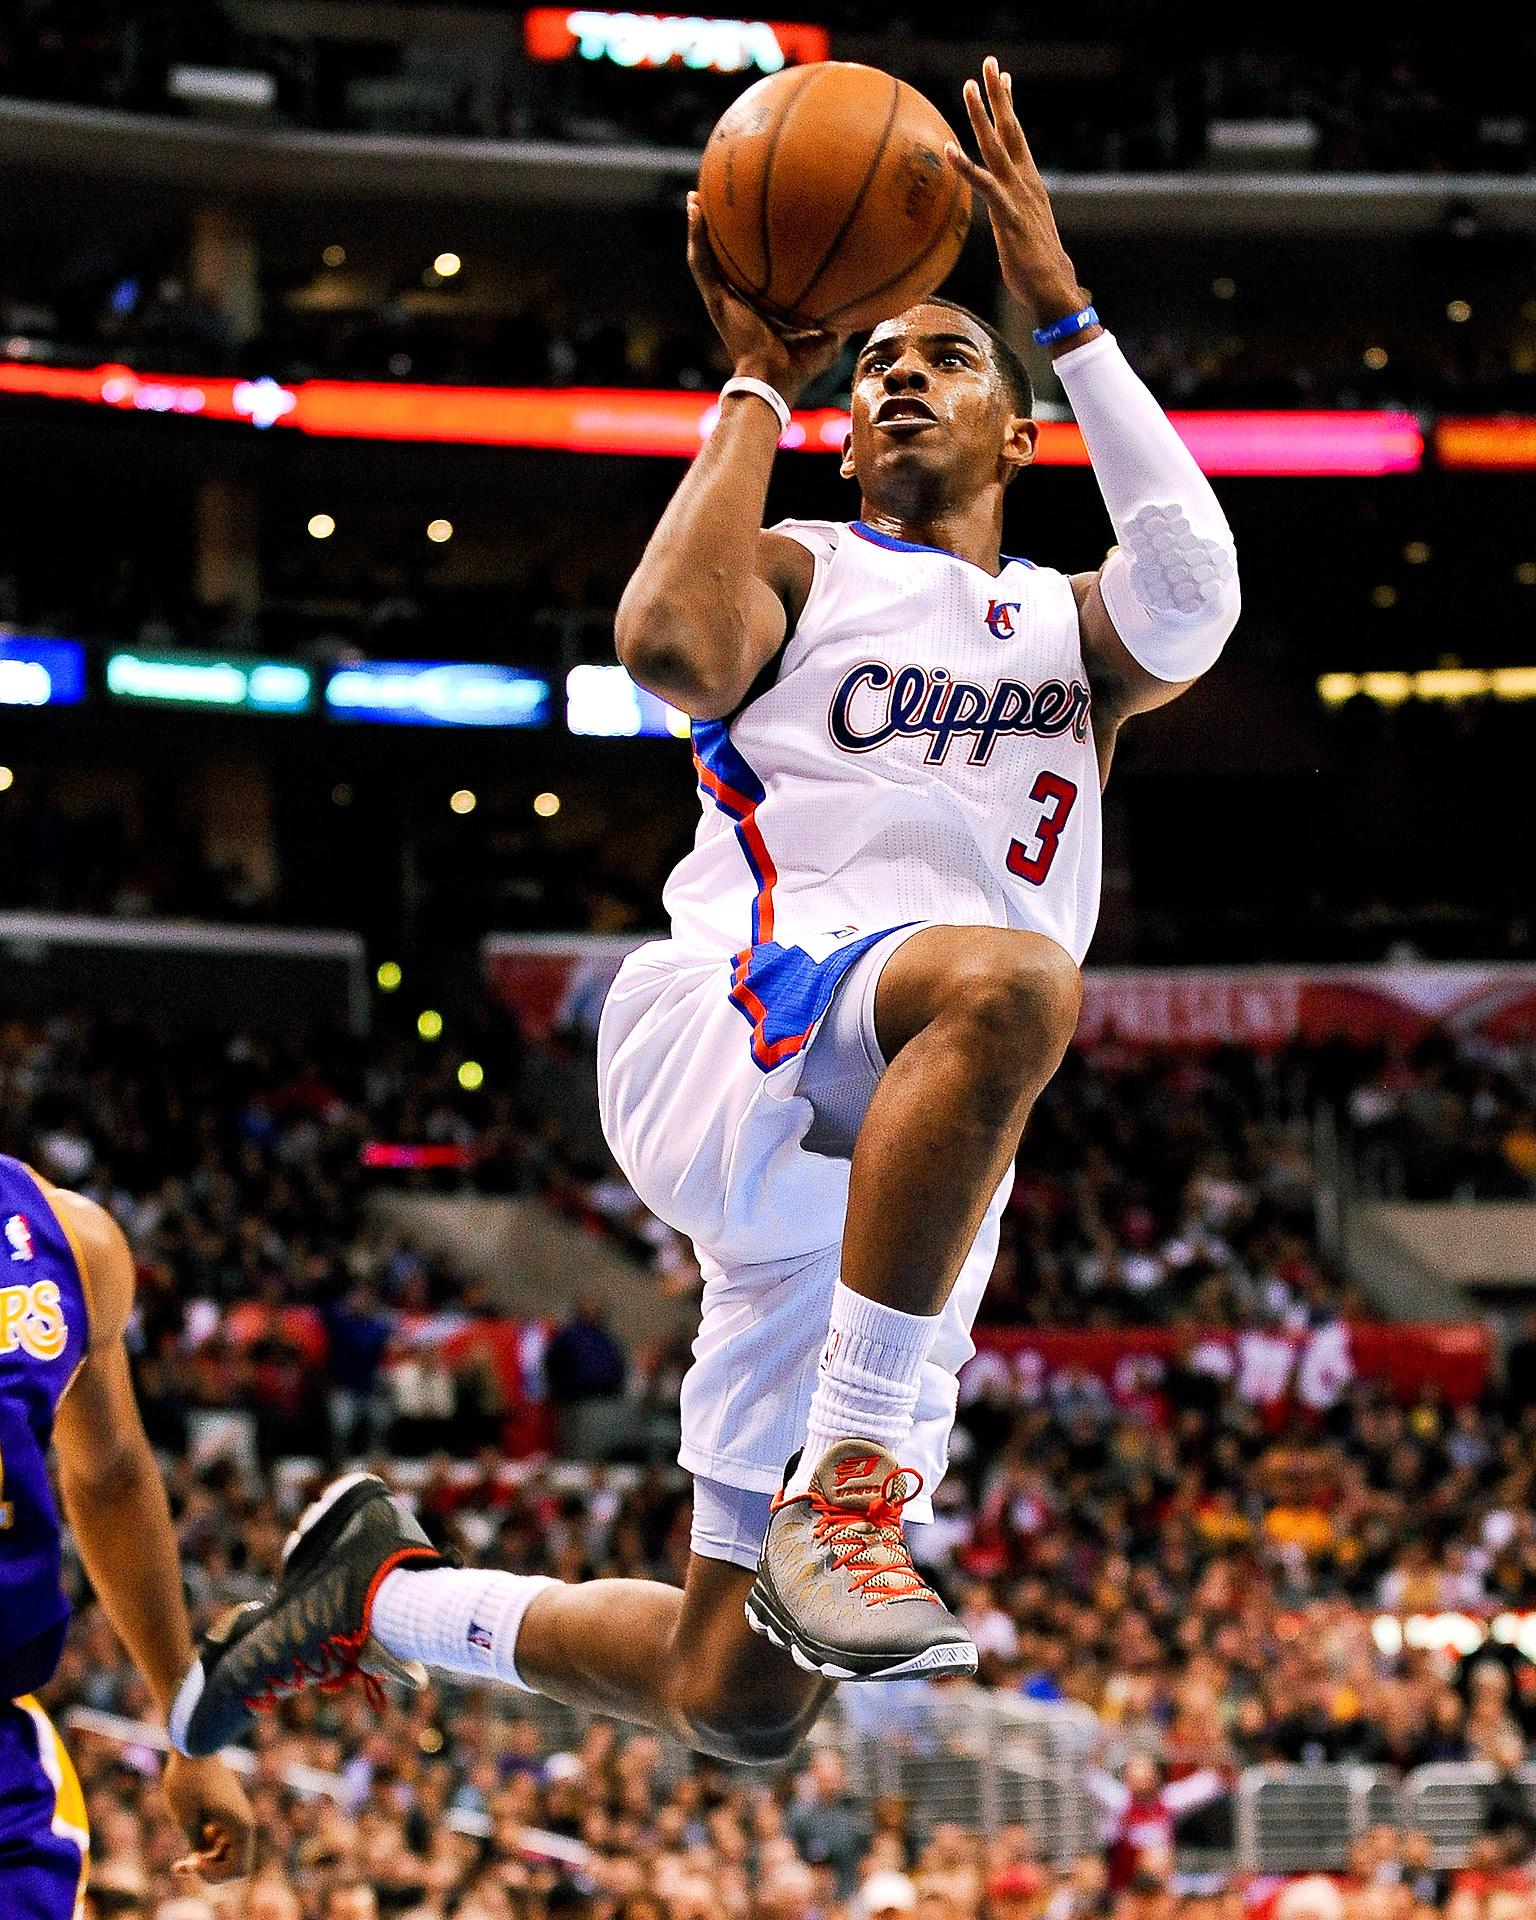 Happy Birthday to Chris Paul, who turns 30 today! 